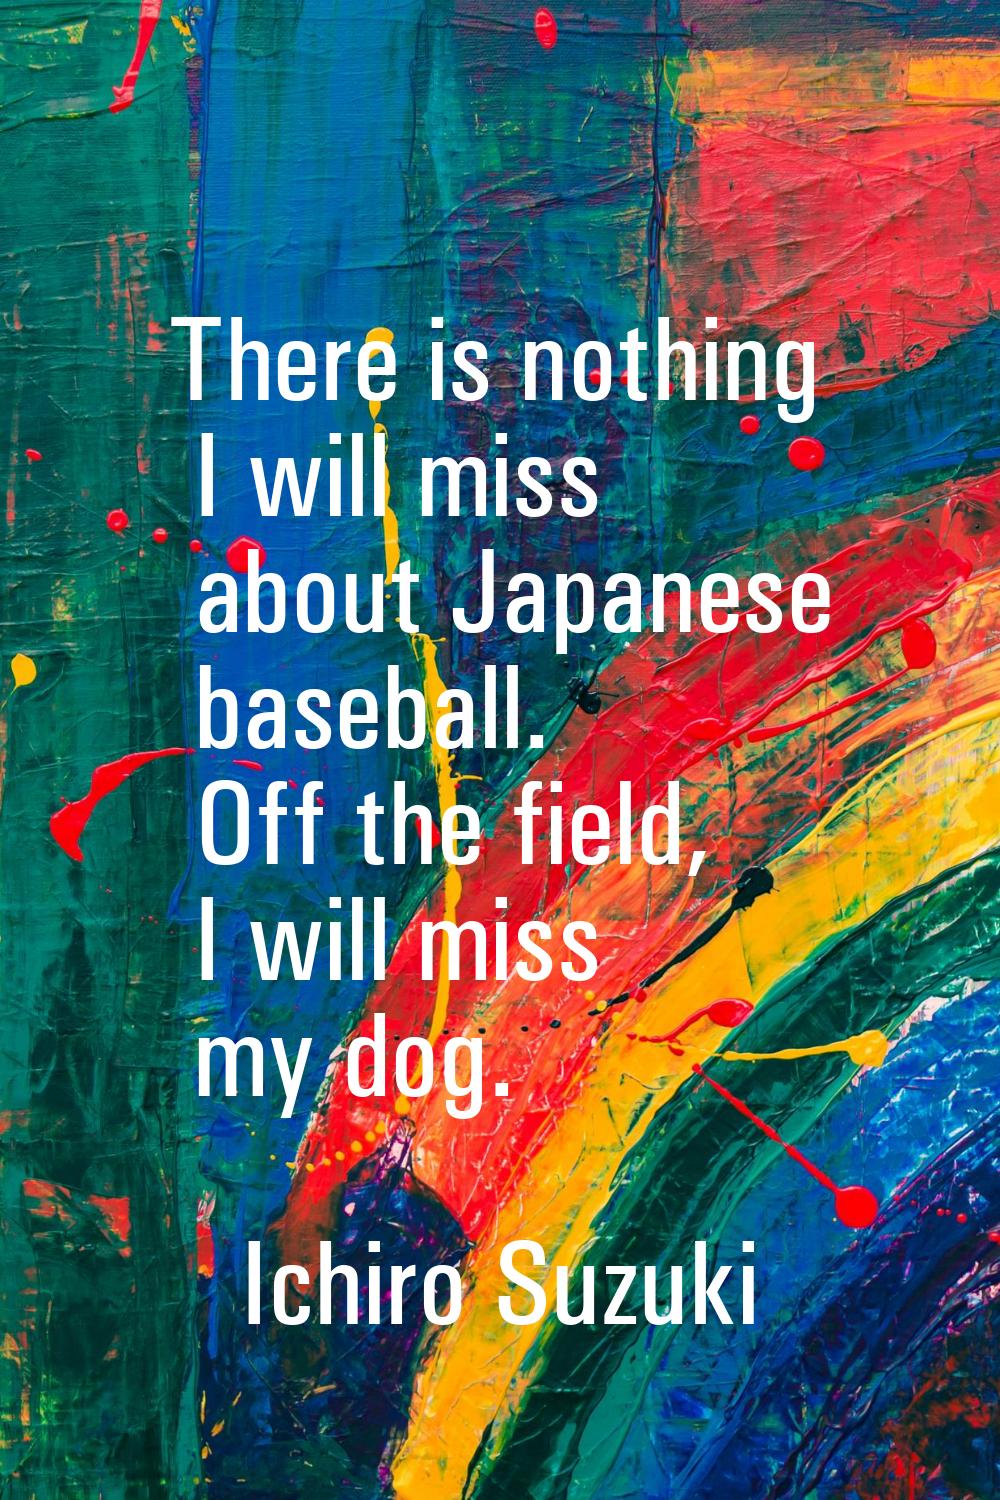 There is nothing I will miss about Japanese baseball. Off the field, I will miss my dog.